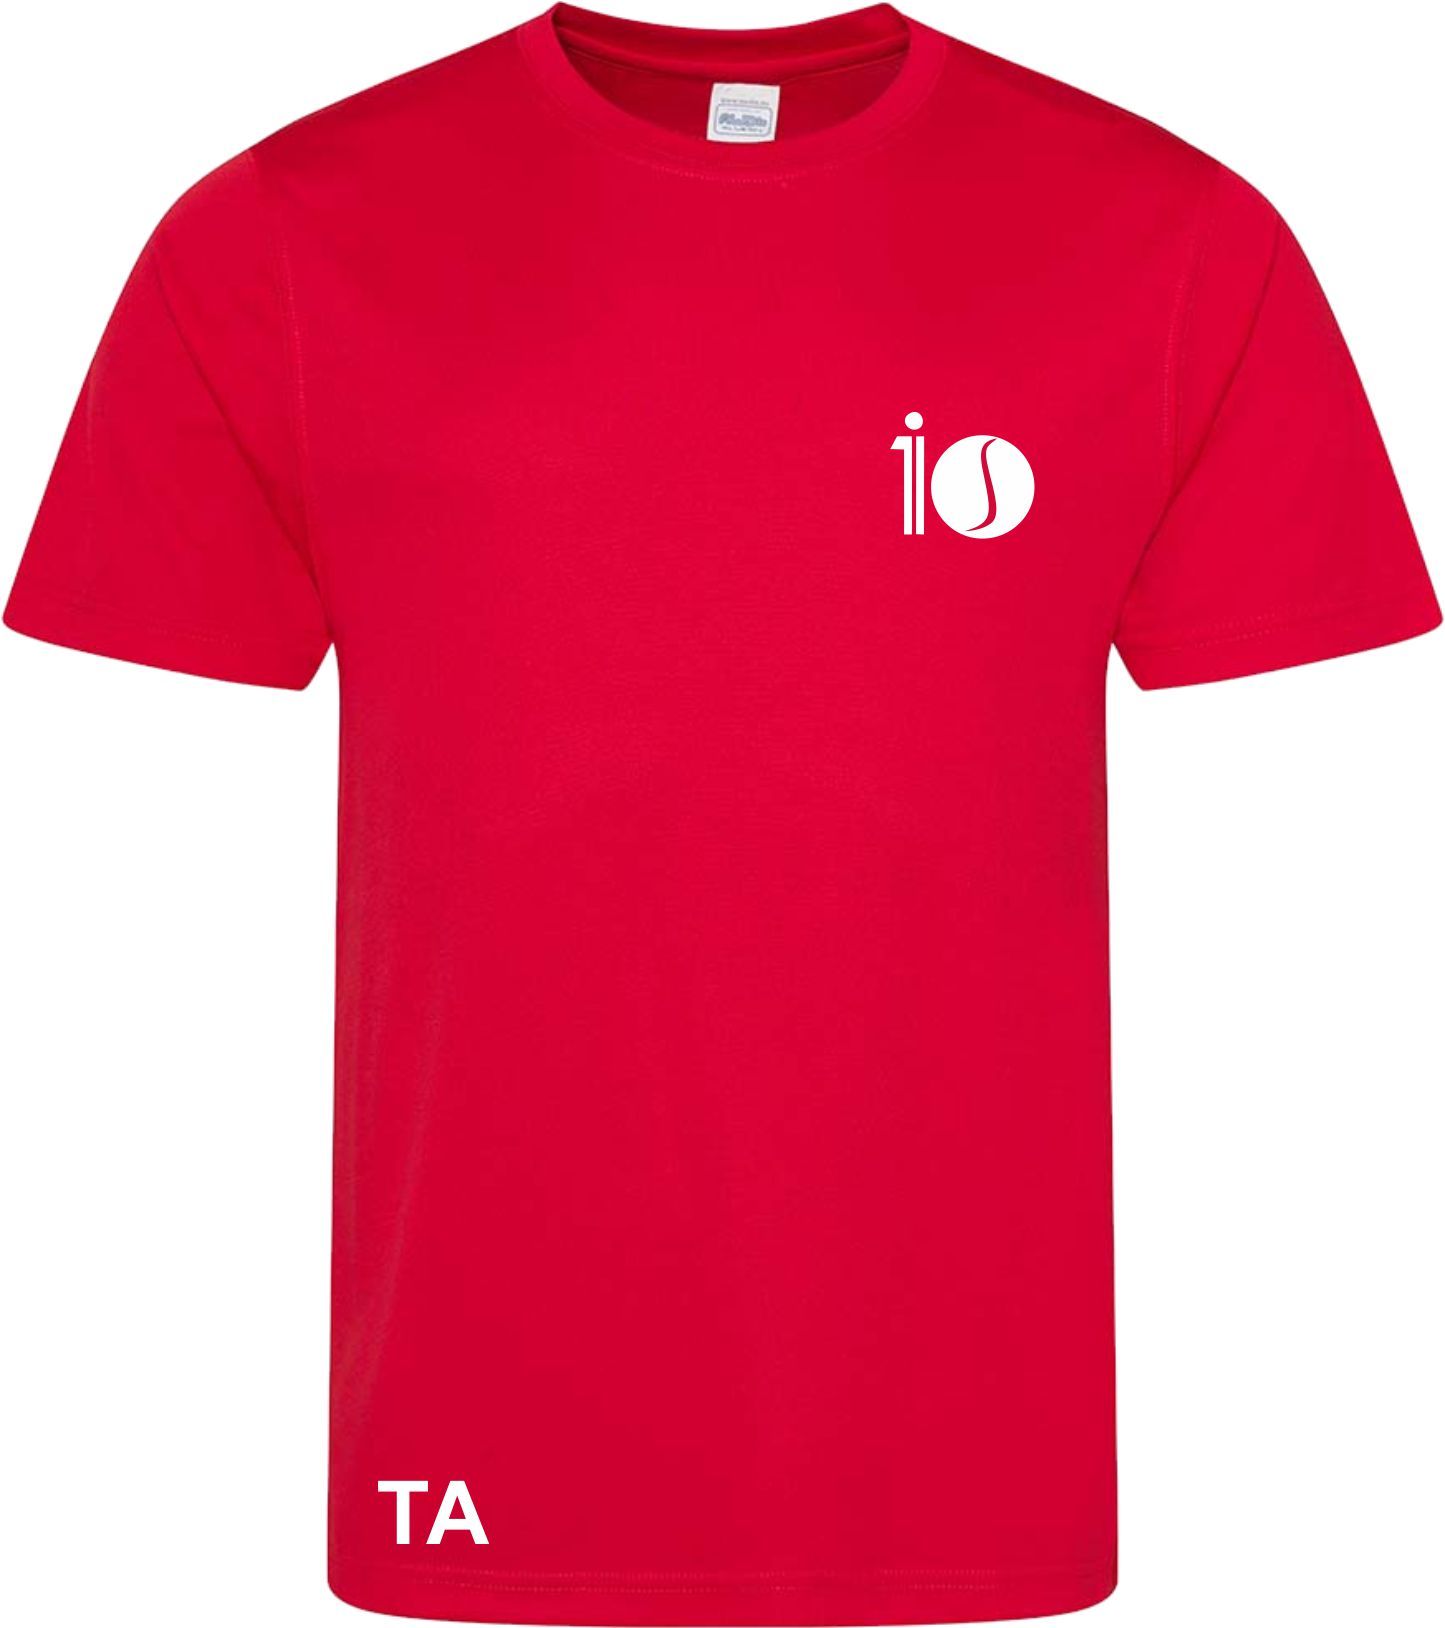 Coaching Staff - 10is Academy Coach Cool T (Unisex)